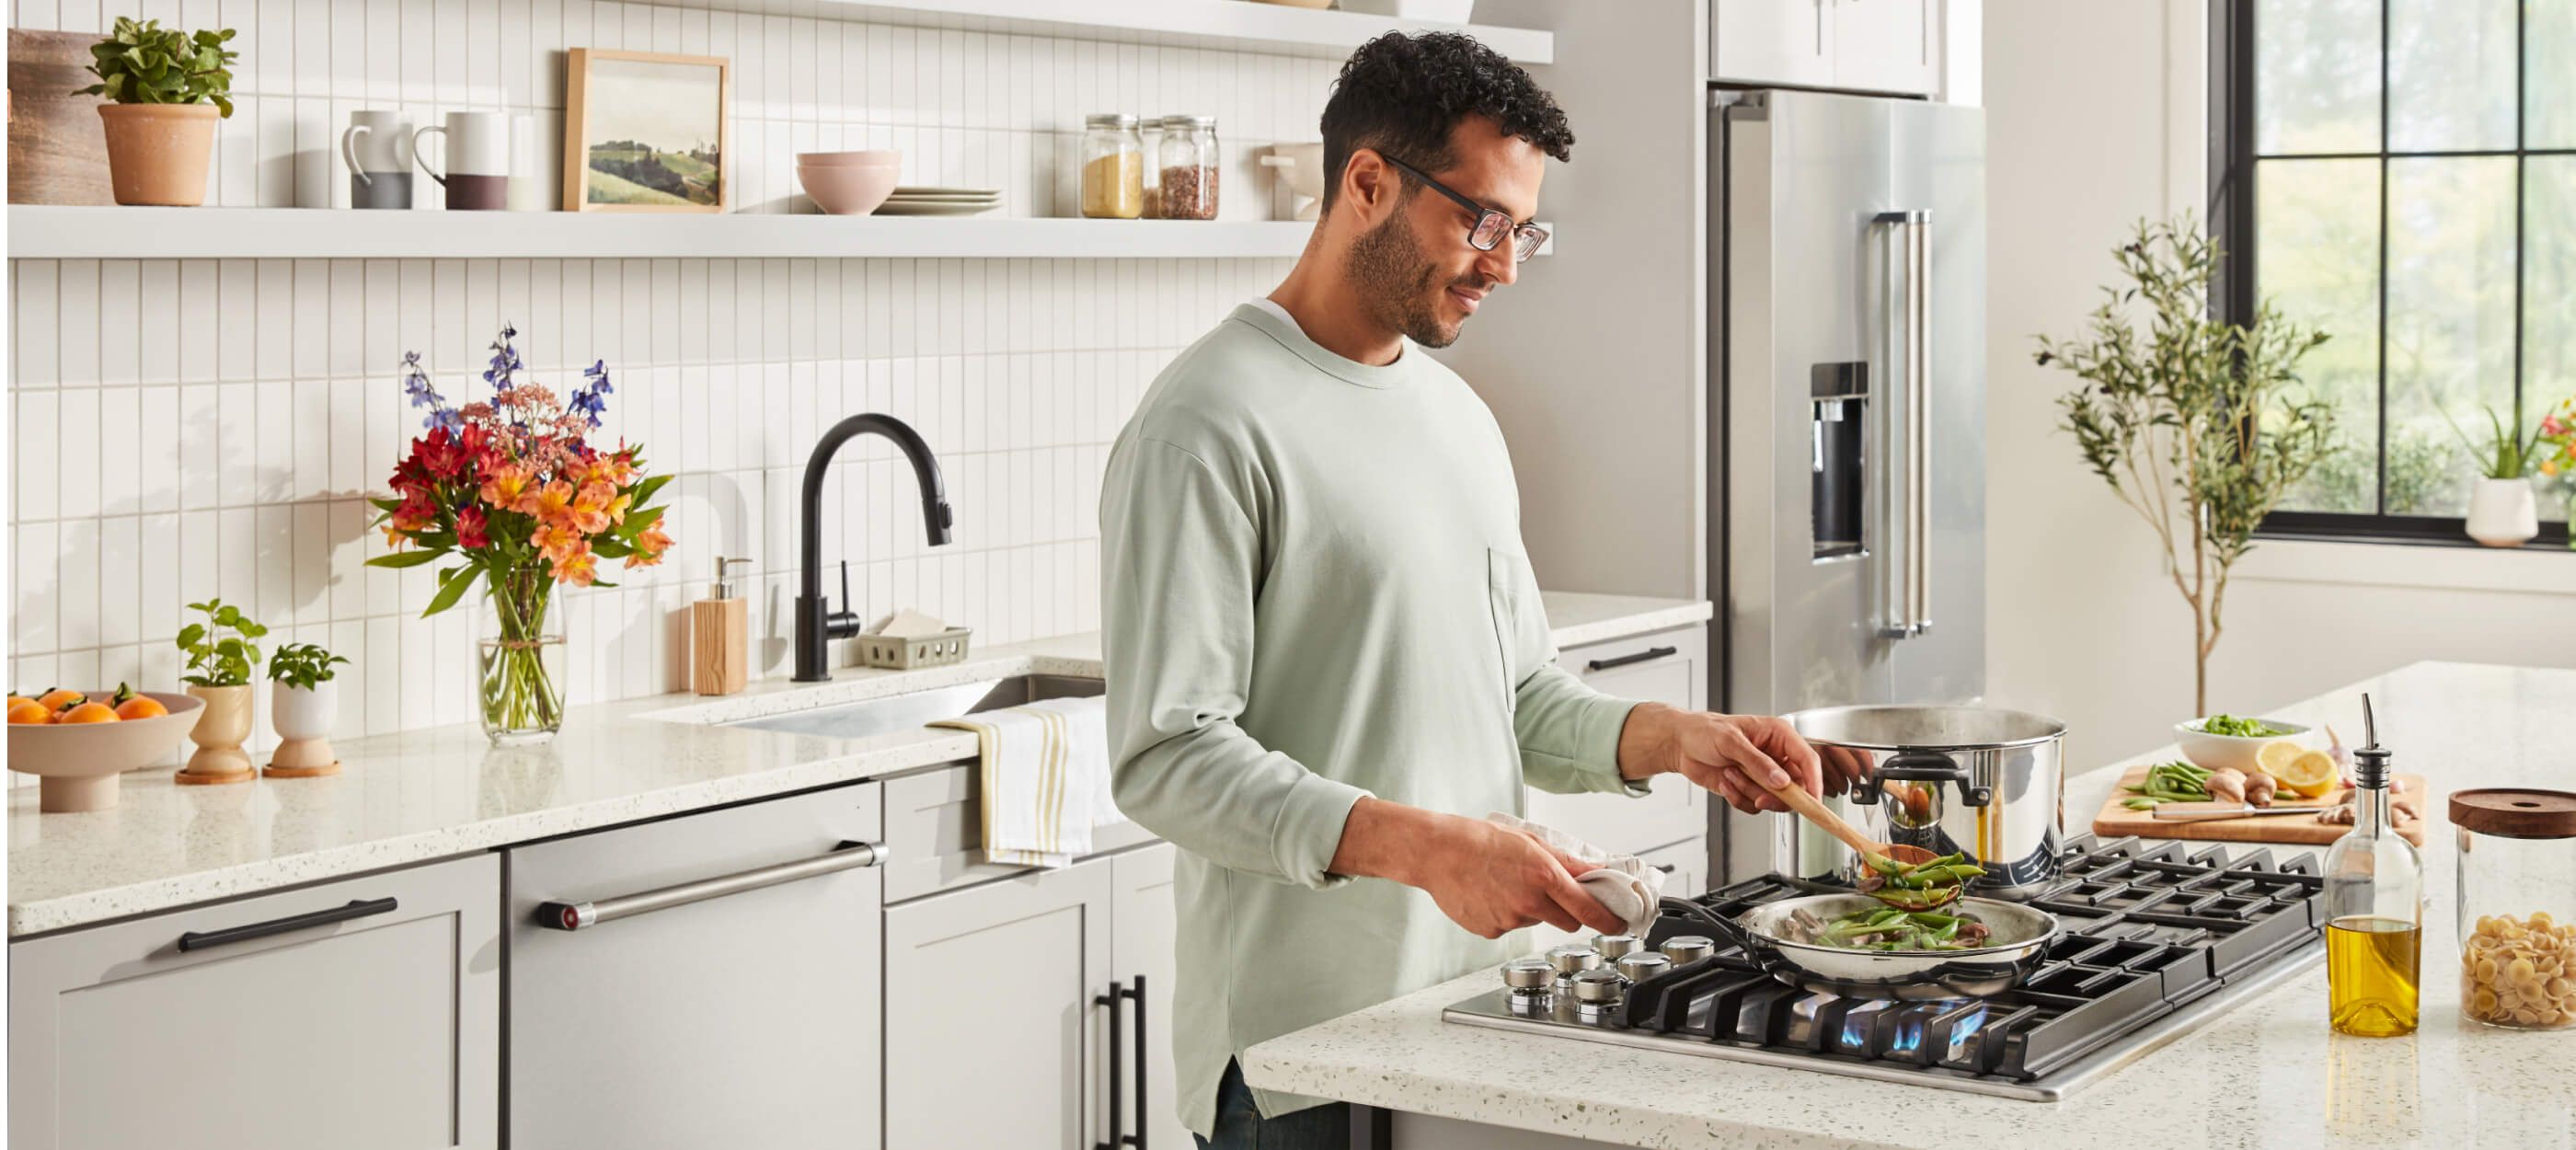 A person cooking over a cooktop in a bright, clean kitchen.